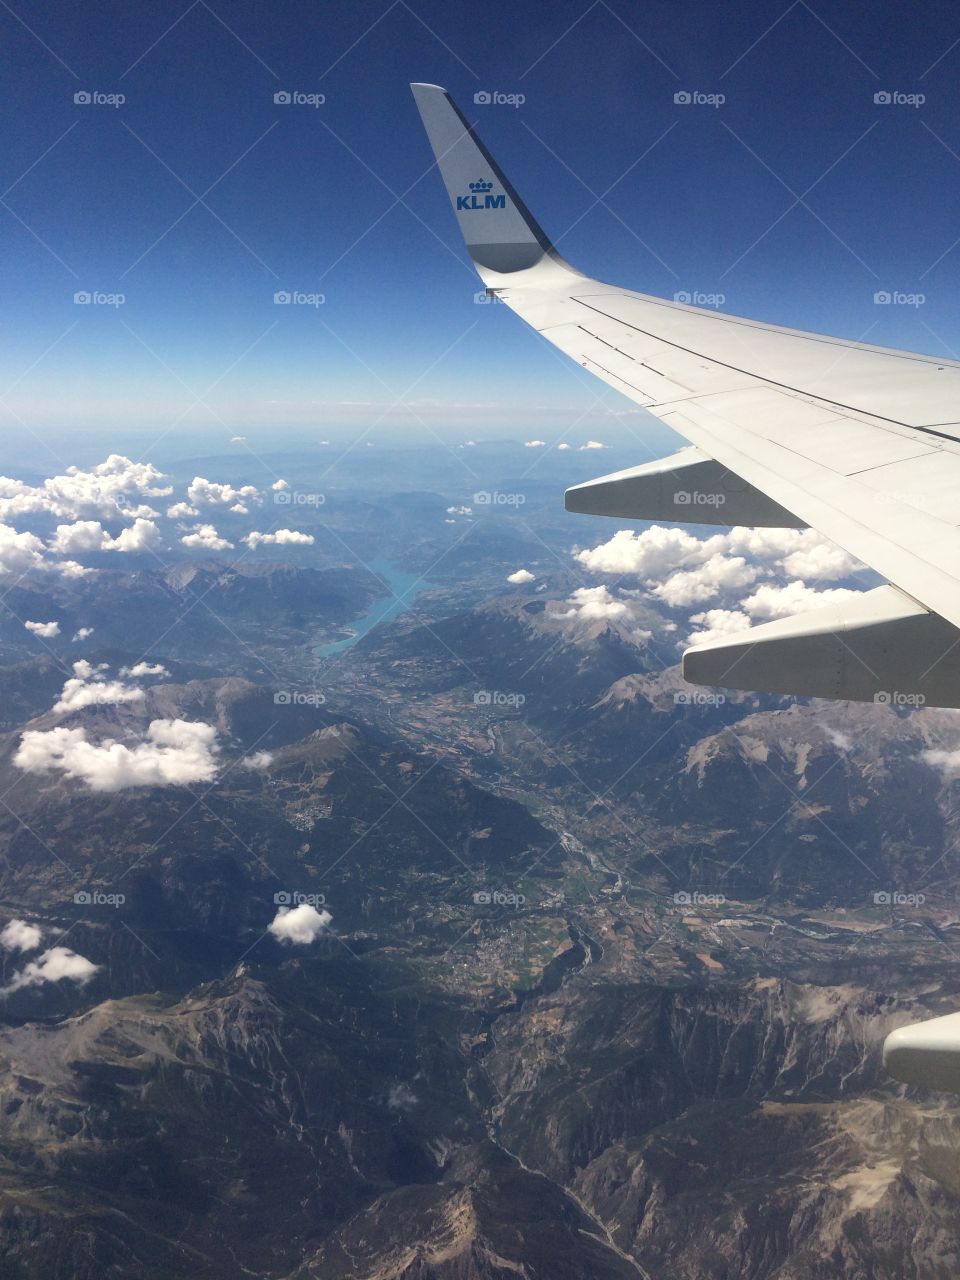 Klm plane in the sky with mountain, sea and cloud